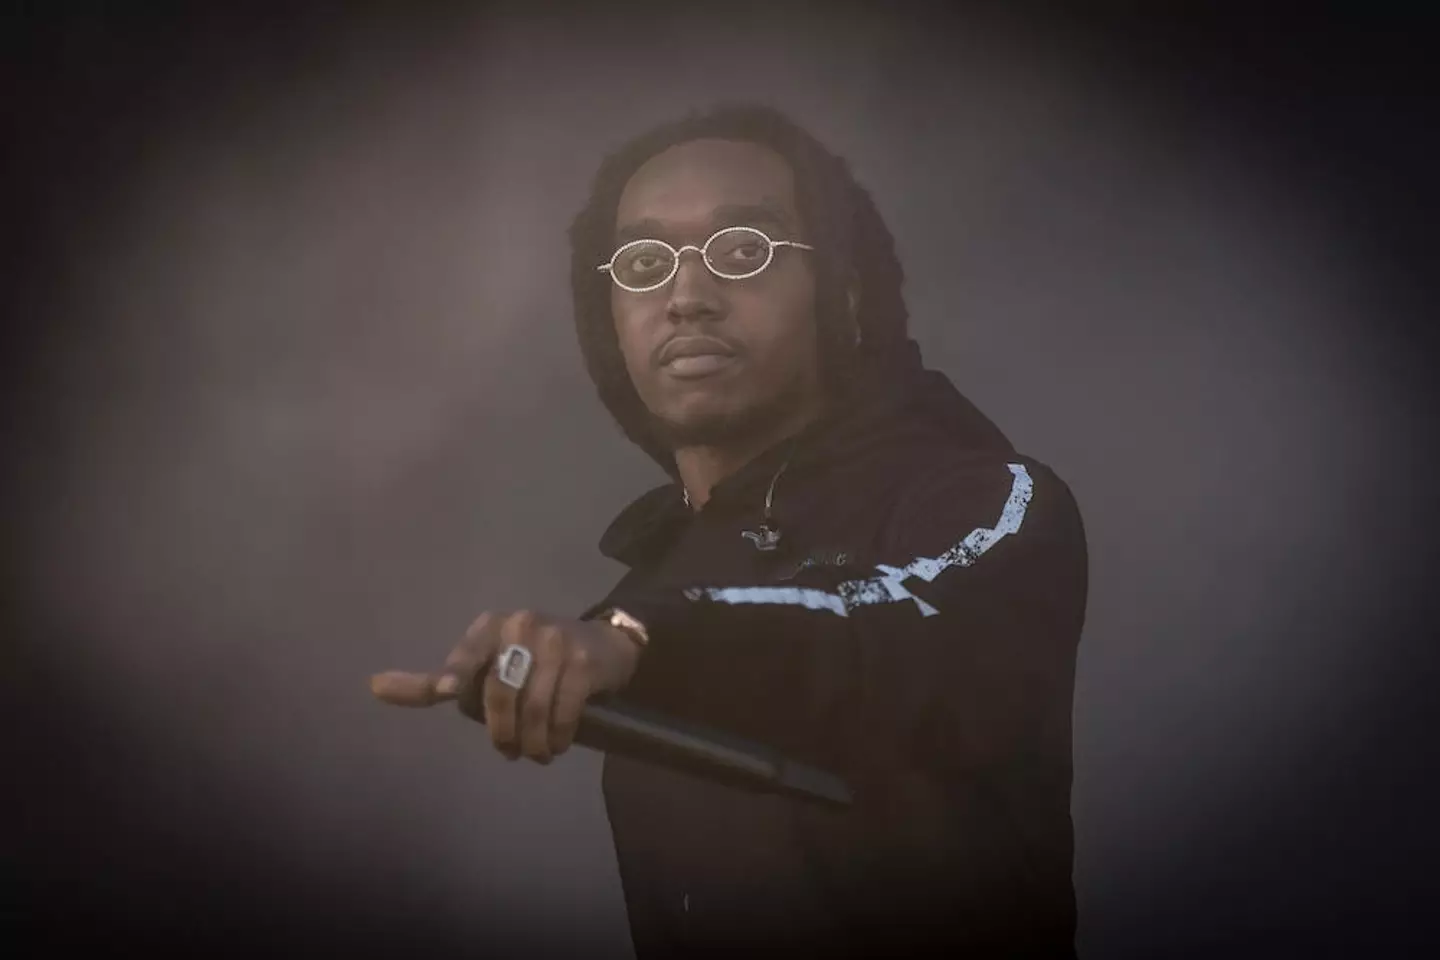 Takeoff, who wasn't involved in the dispute, tragically lost his life.